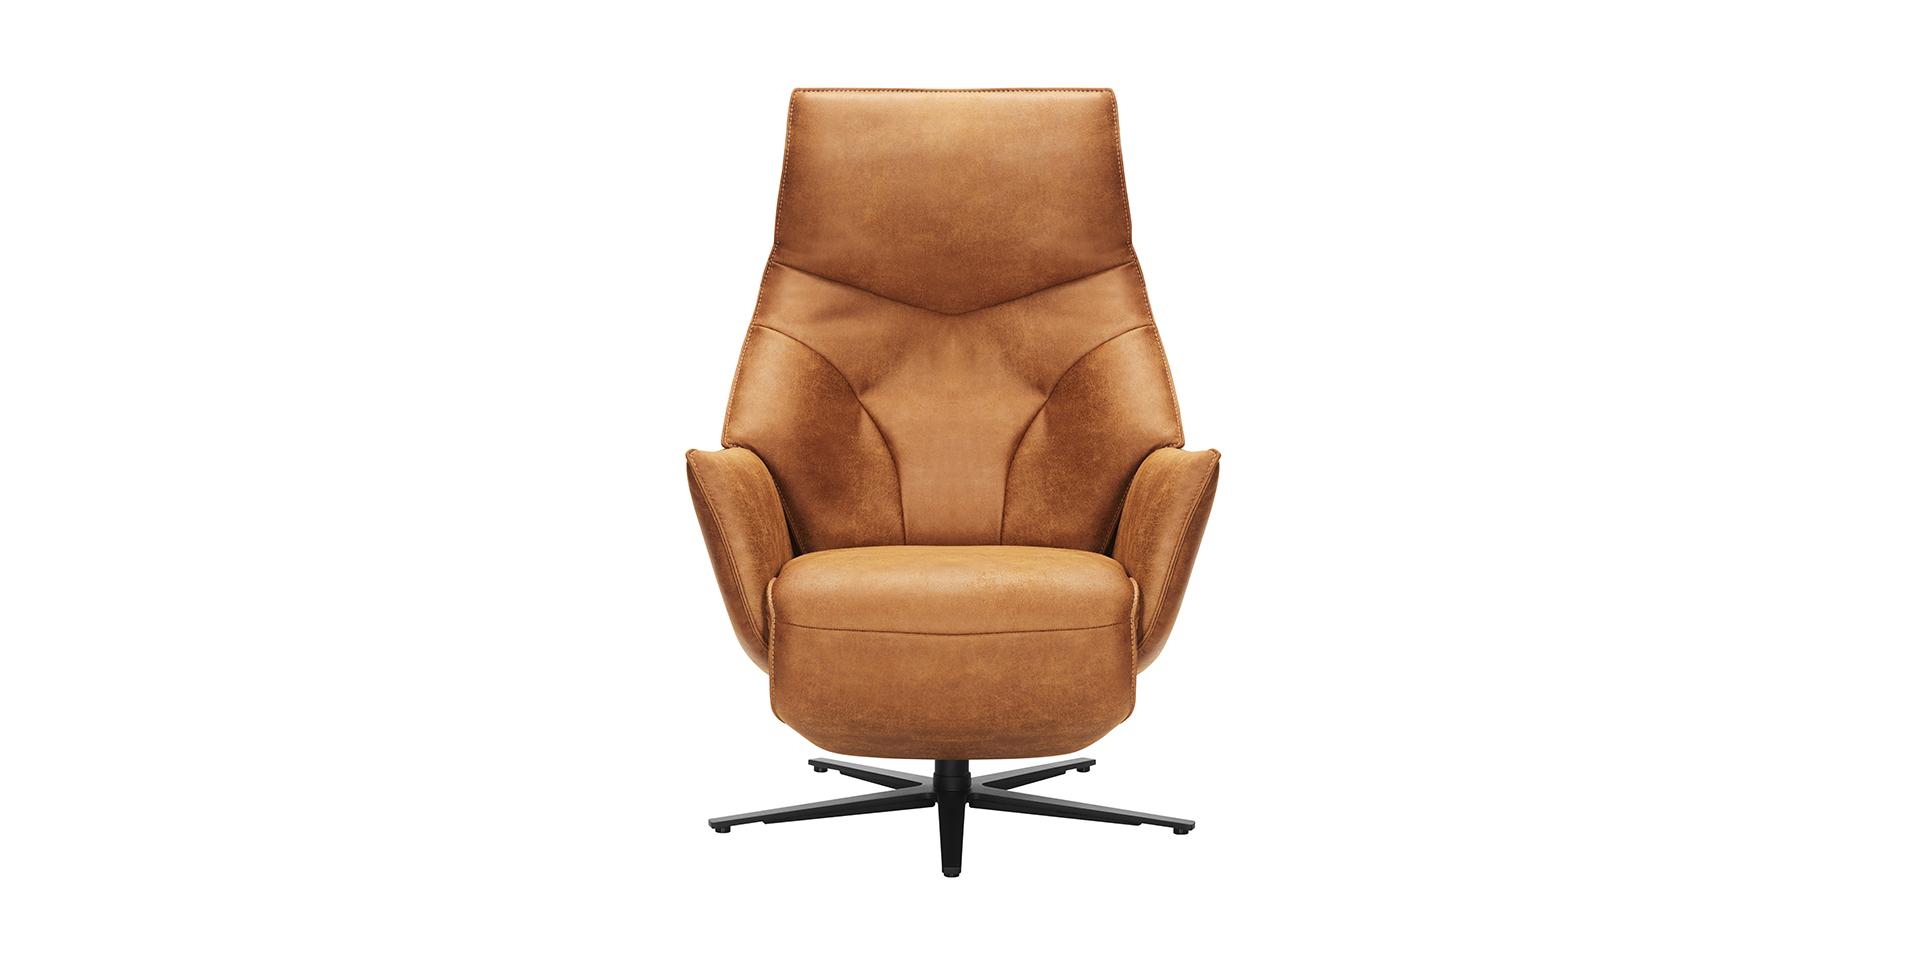 Fauteuil relaxation cuir